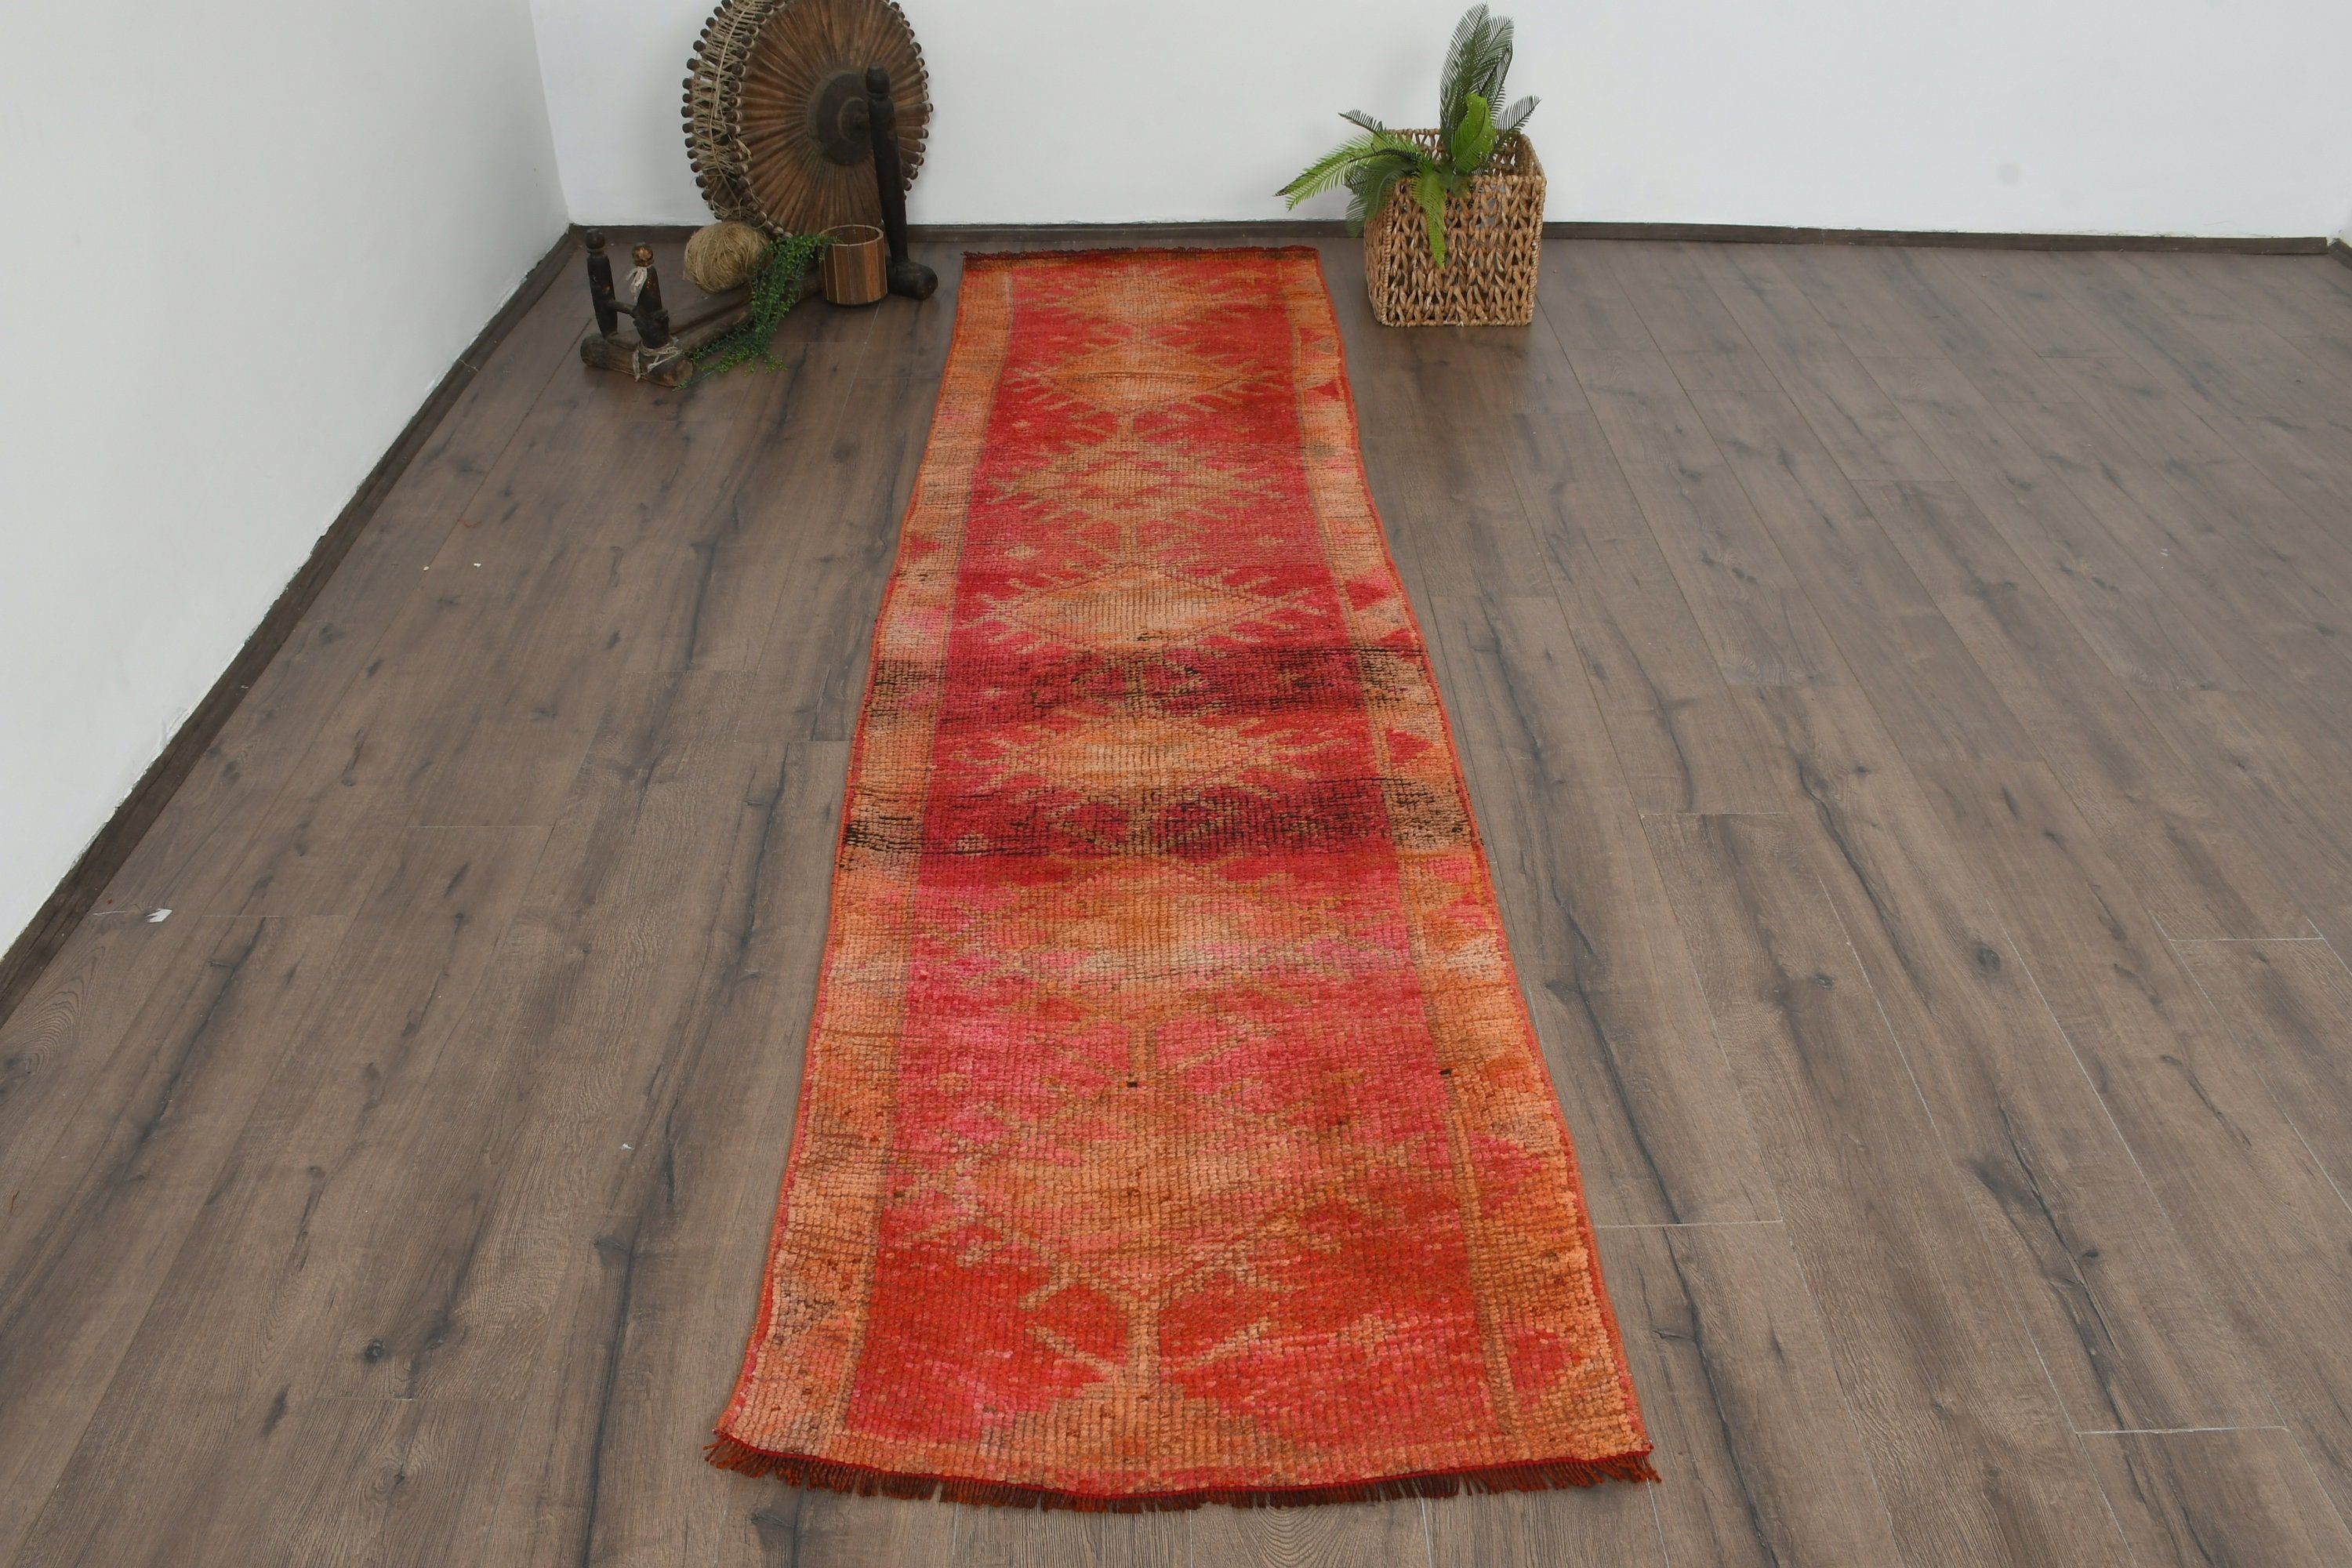 Eclectic Rug, Vintage Rug, Turkish Rug, Wool Rugs, Kitchen Rug, 2.5x9.7 ft Runner Rugs, Rugs for Kitchen, Anatolian Rugs, Red Oriental Rugs